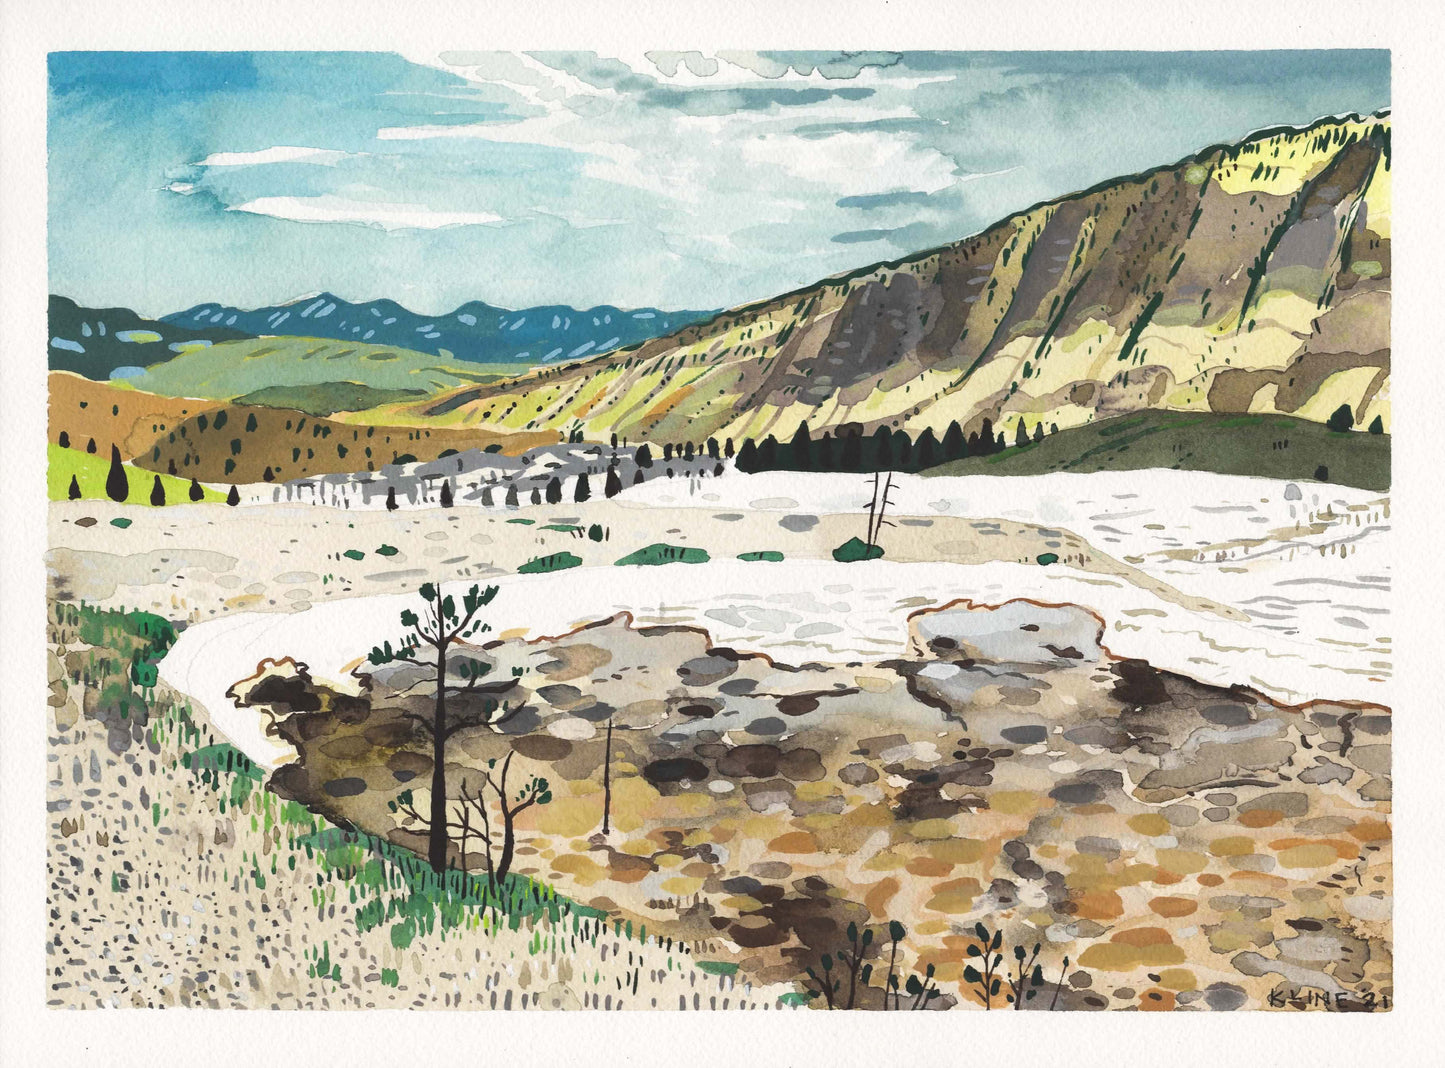 Yellowstone National Park, Mammoth Hot Springs. Watercolor on Paper. 9" x 12"